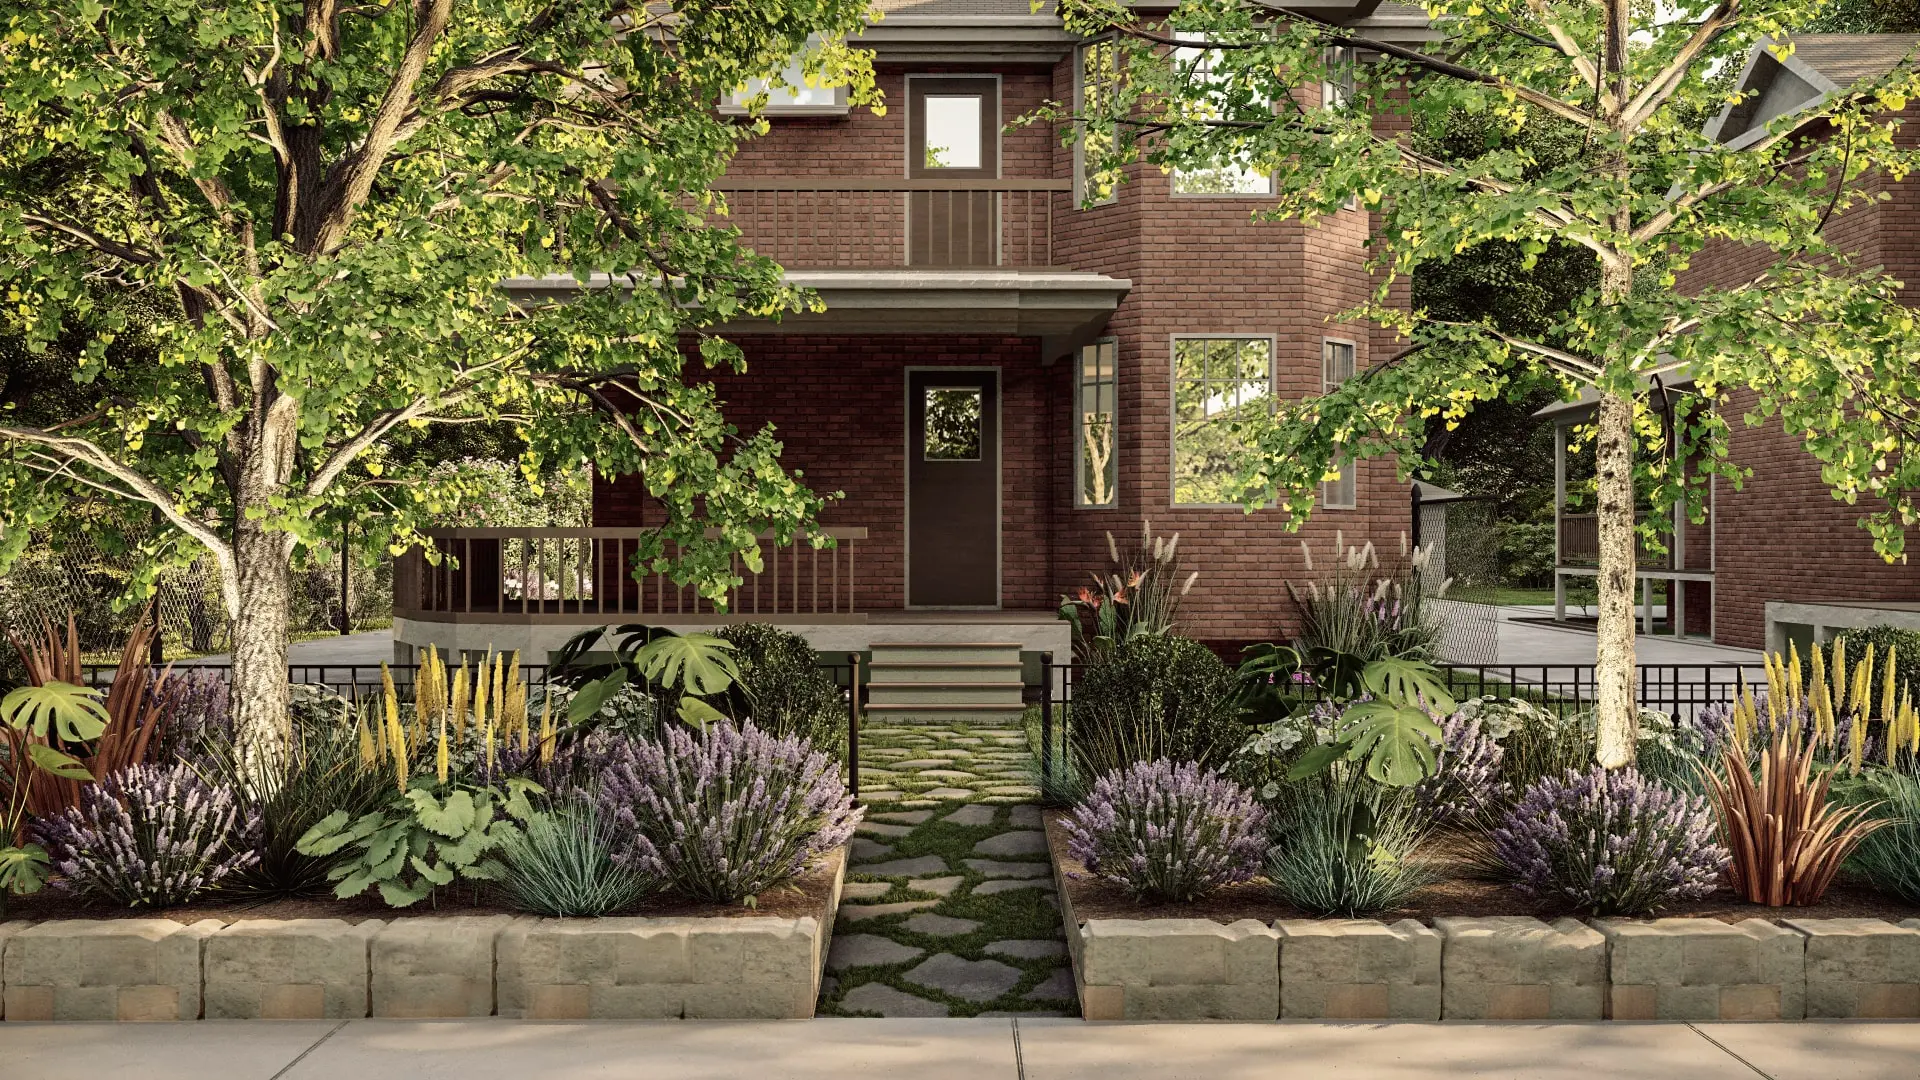 Welcoming front yard design featuring a stone walkway flanked by blooming lavender and yellow flowers, leading to a cozy red brick house with mature trees.